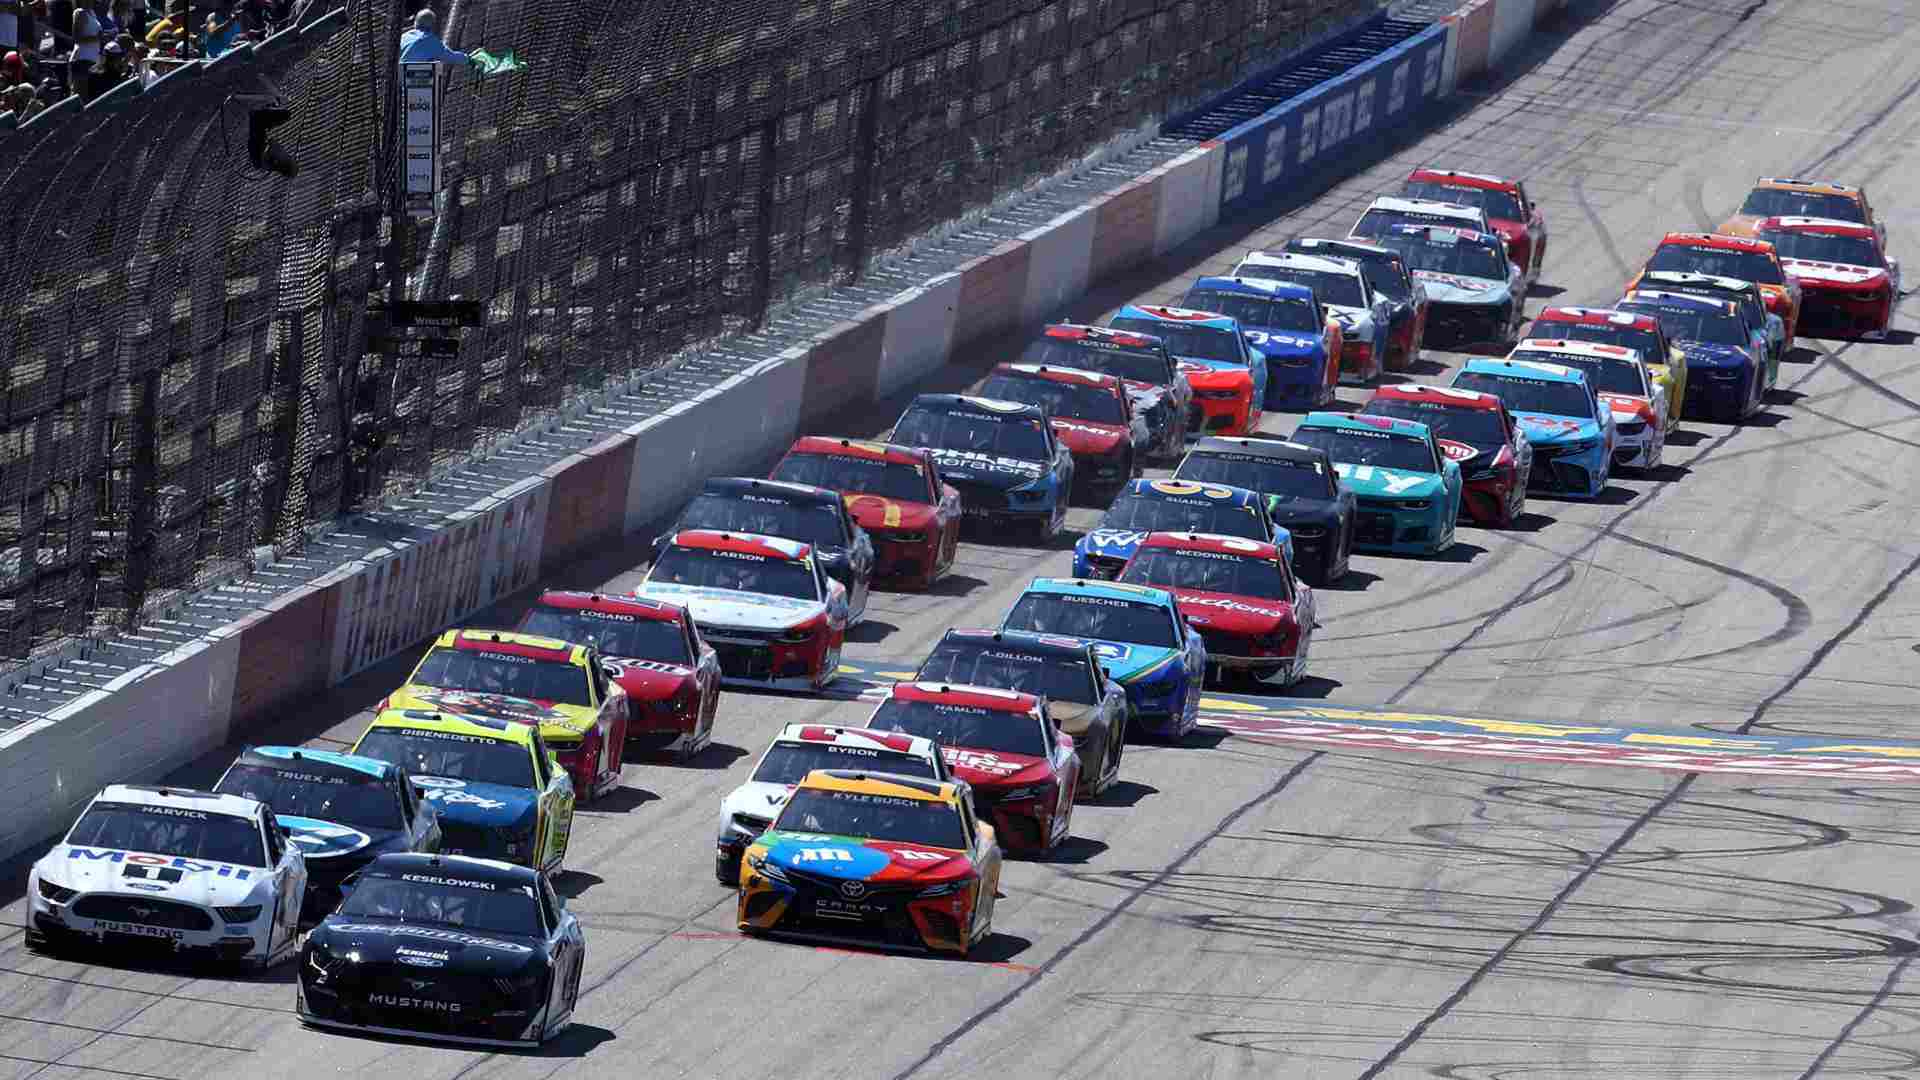 Nascar Cup Series cars on track (Image credits: Twitter)